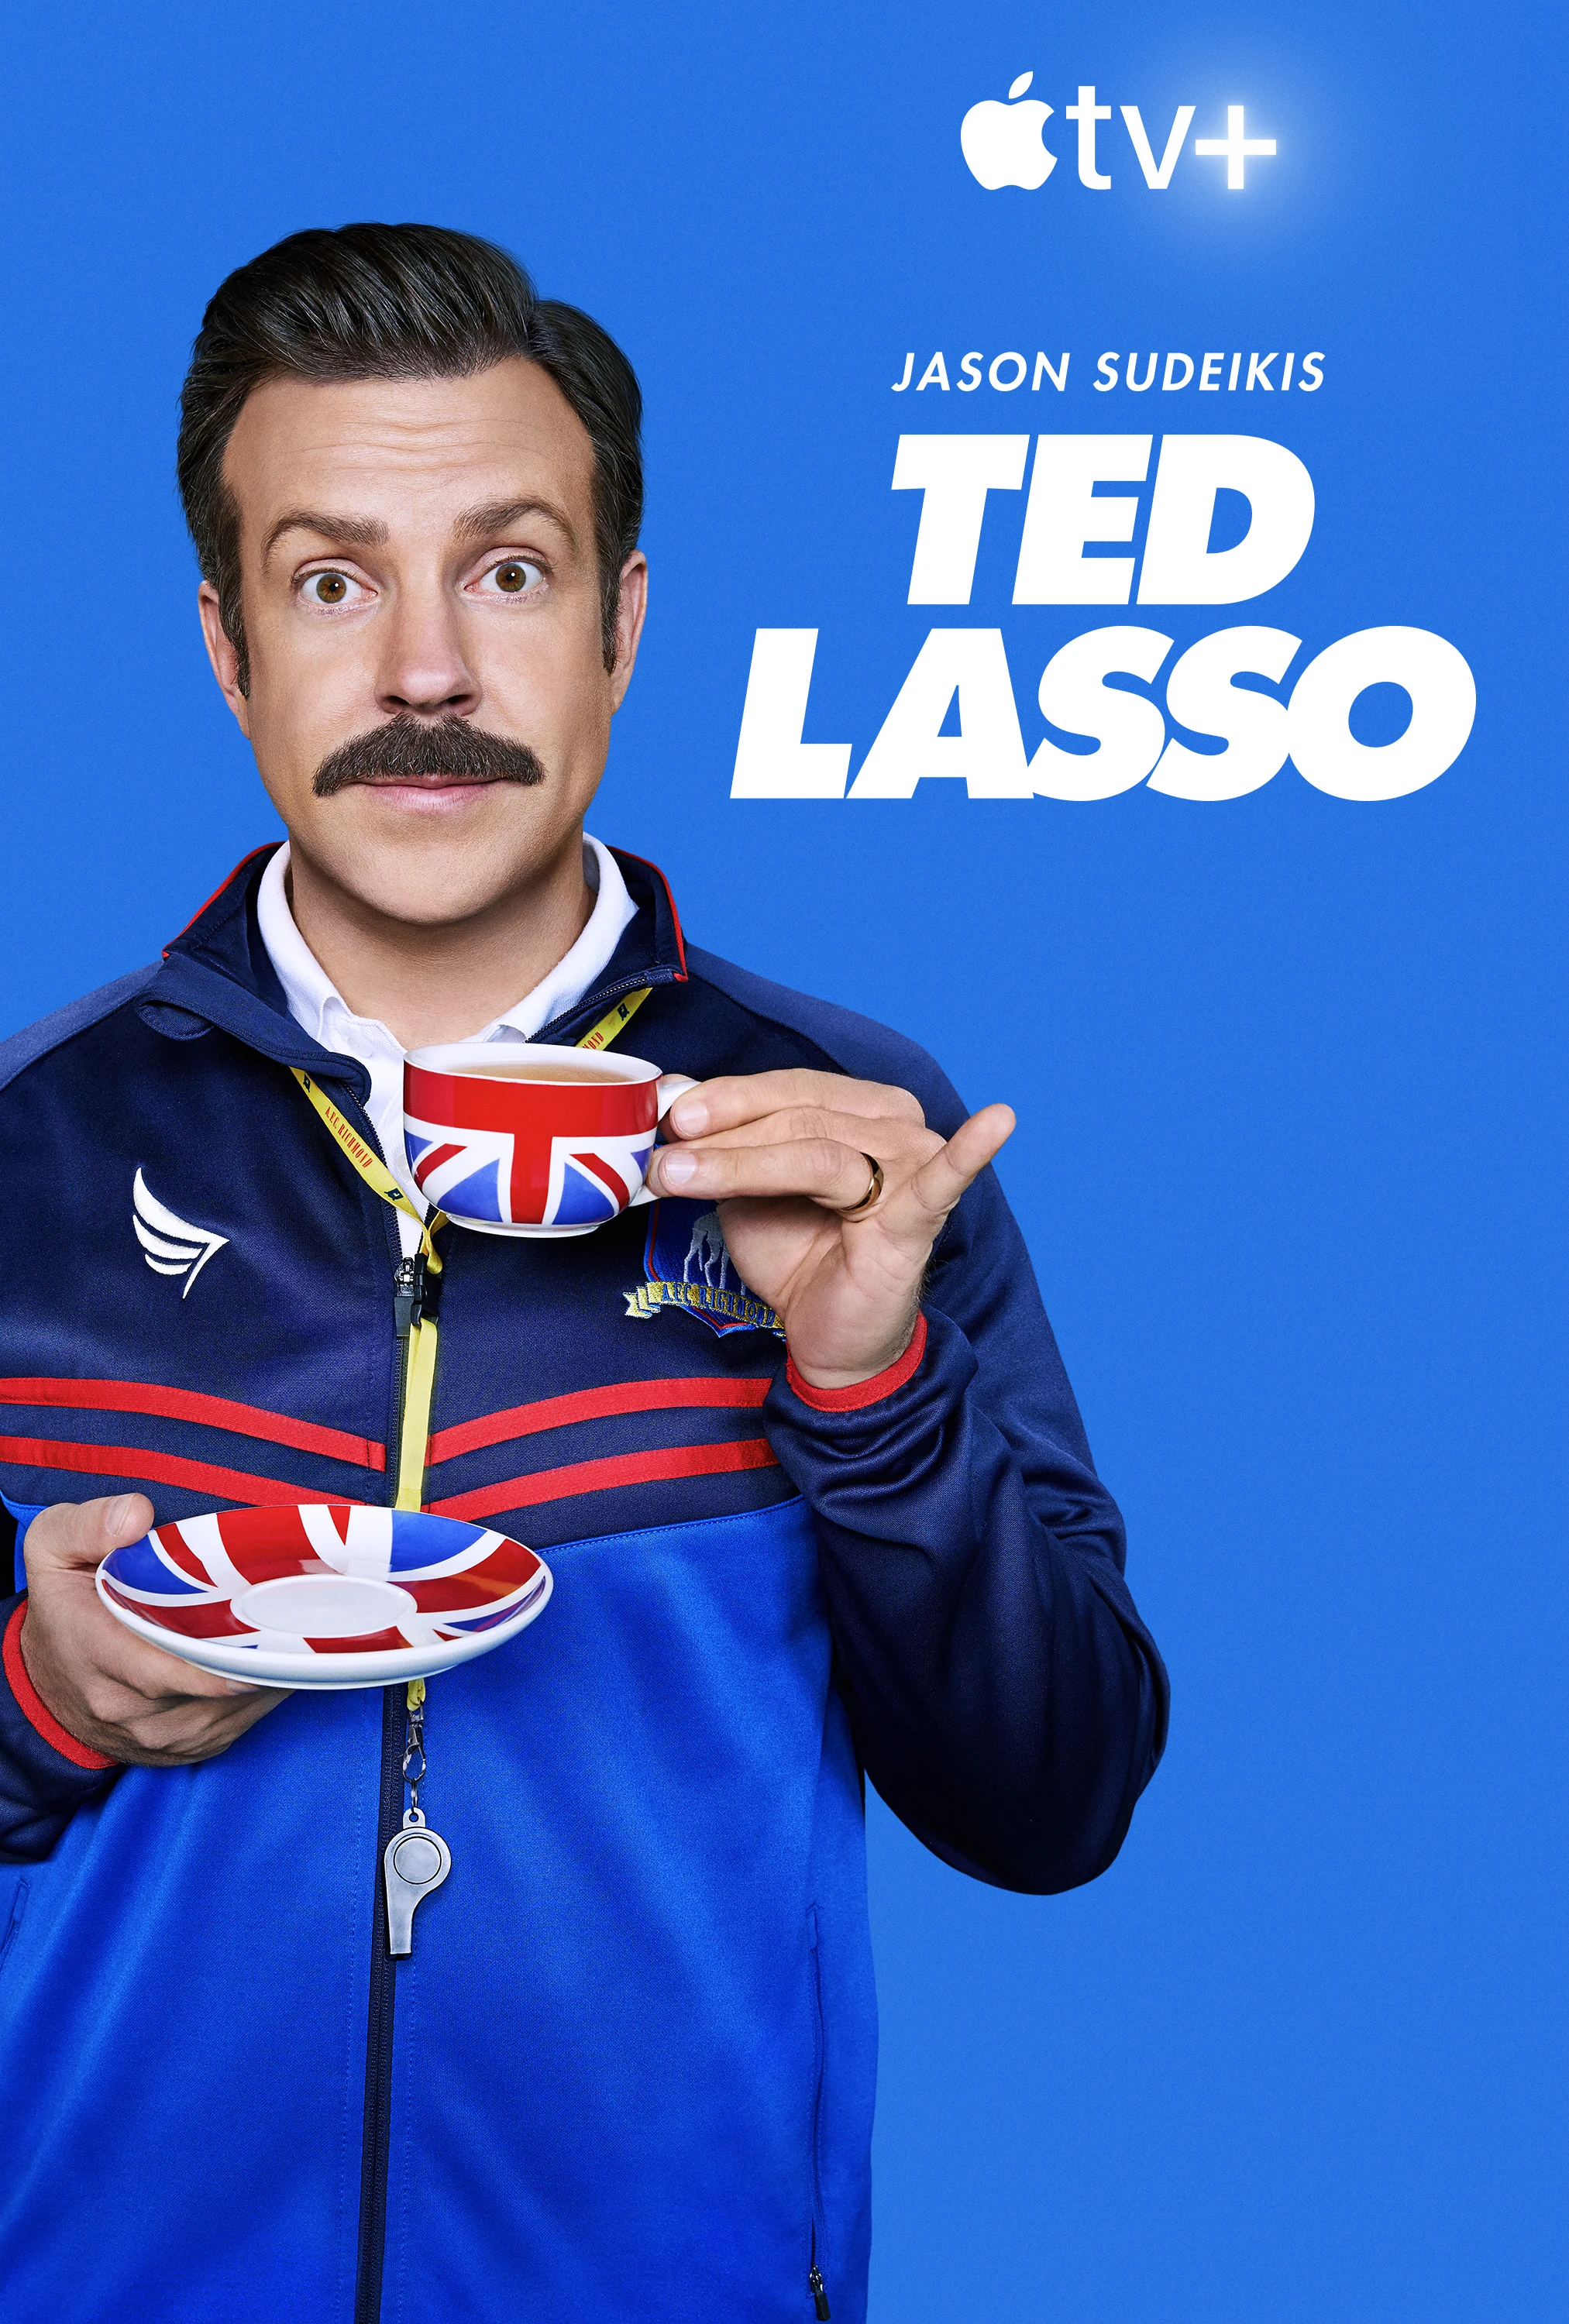 inspiration quotes from Ted Lasso